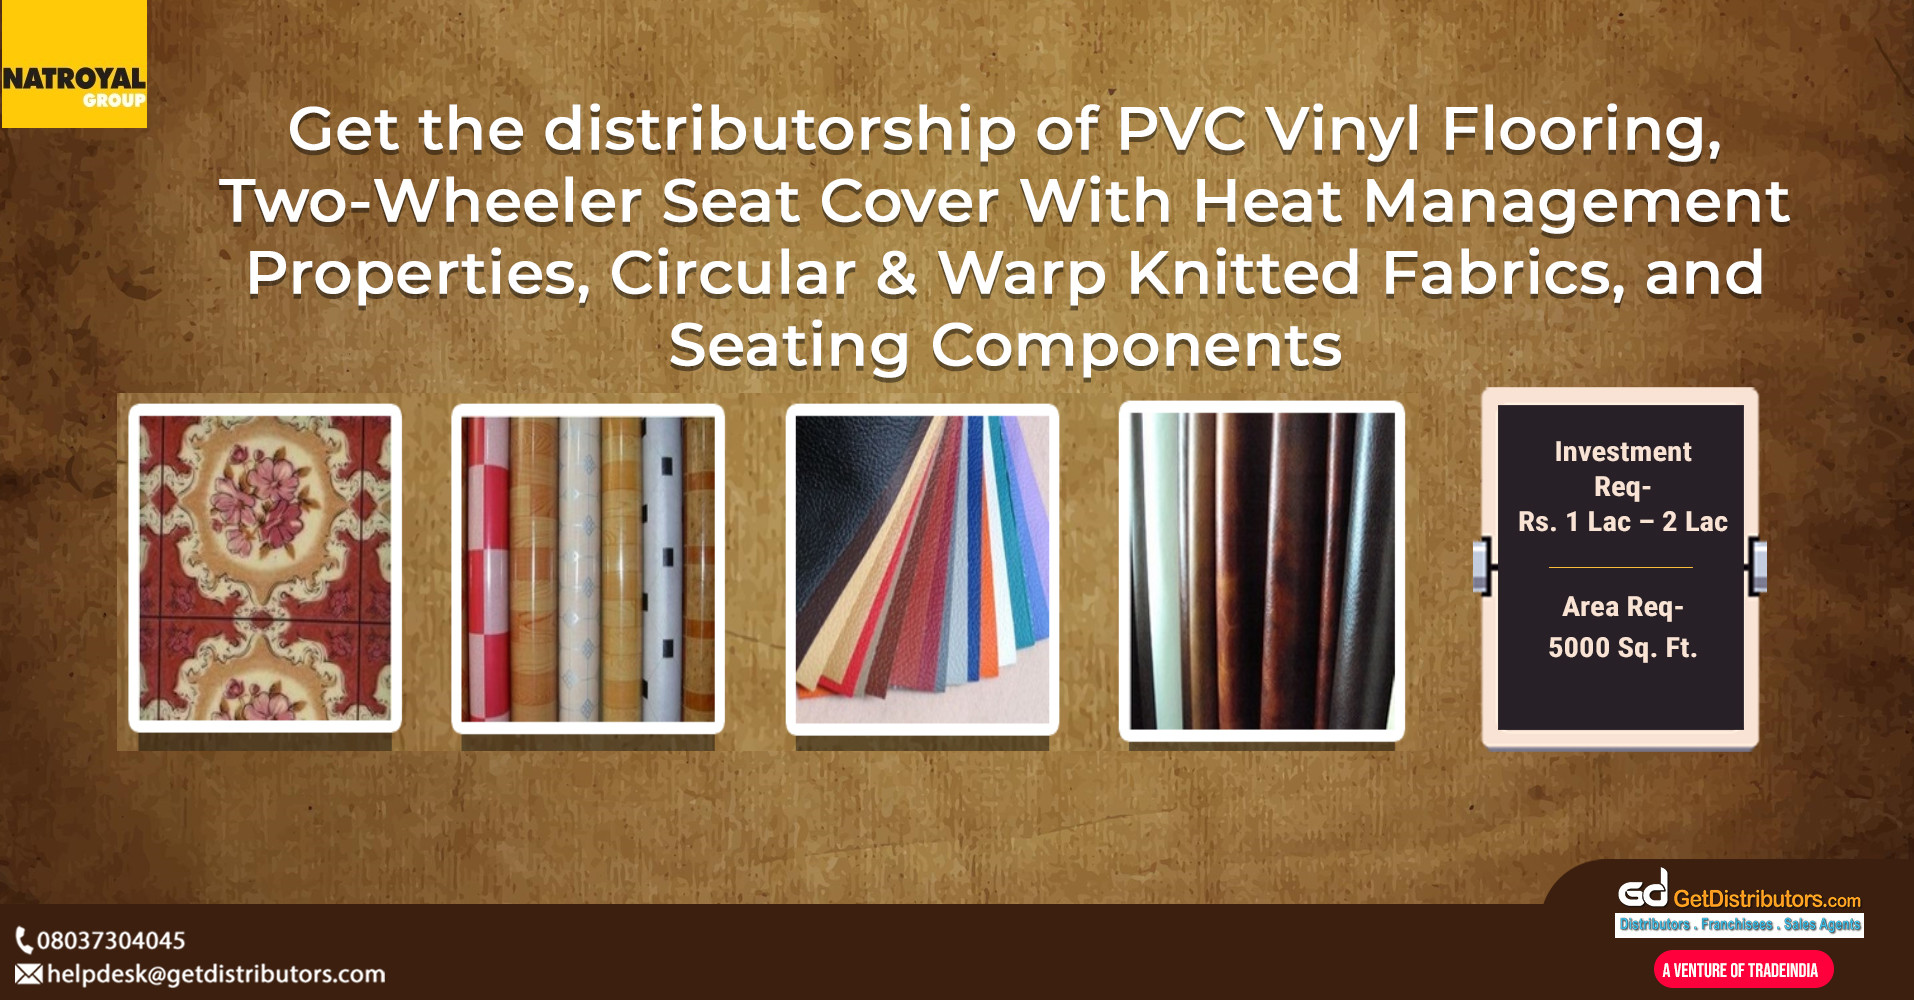 High-quality seat covers, seating components, flooring, and other products for distribution